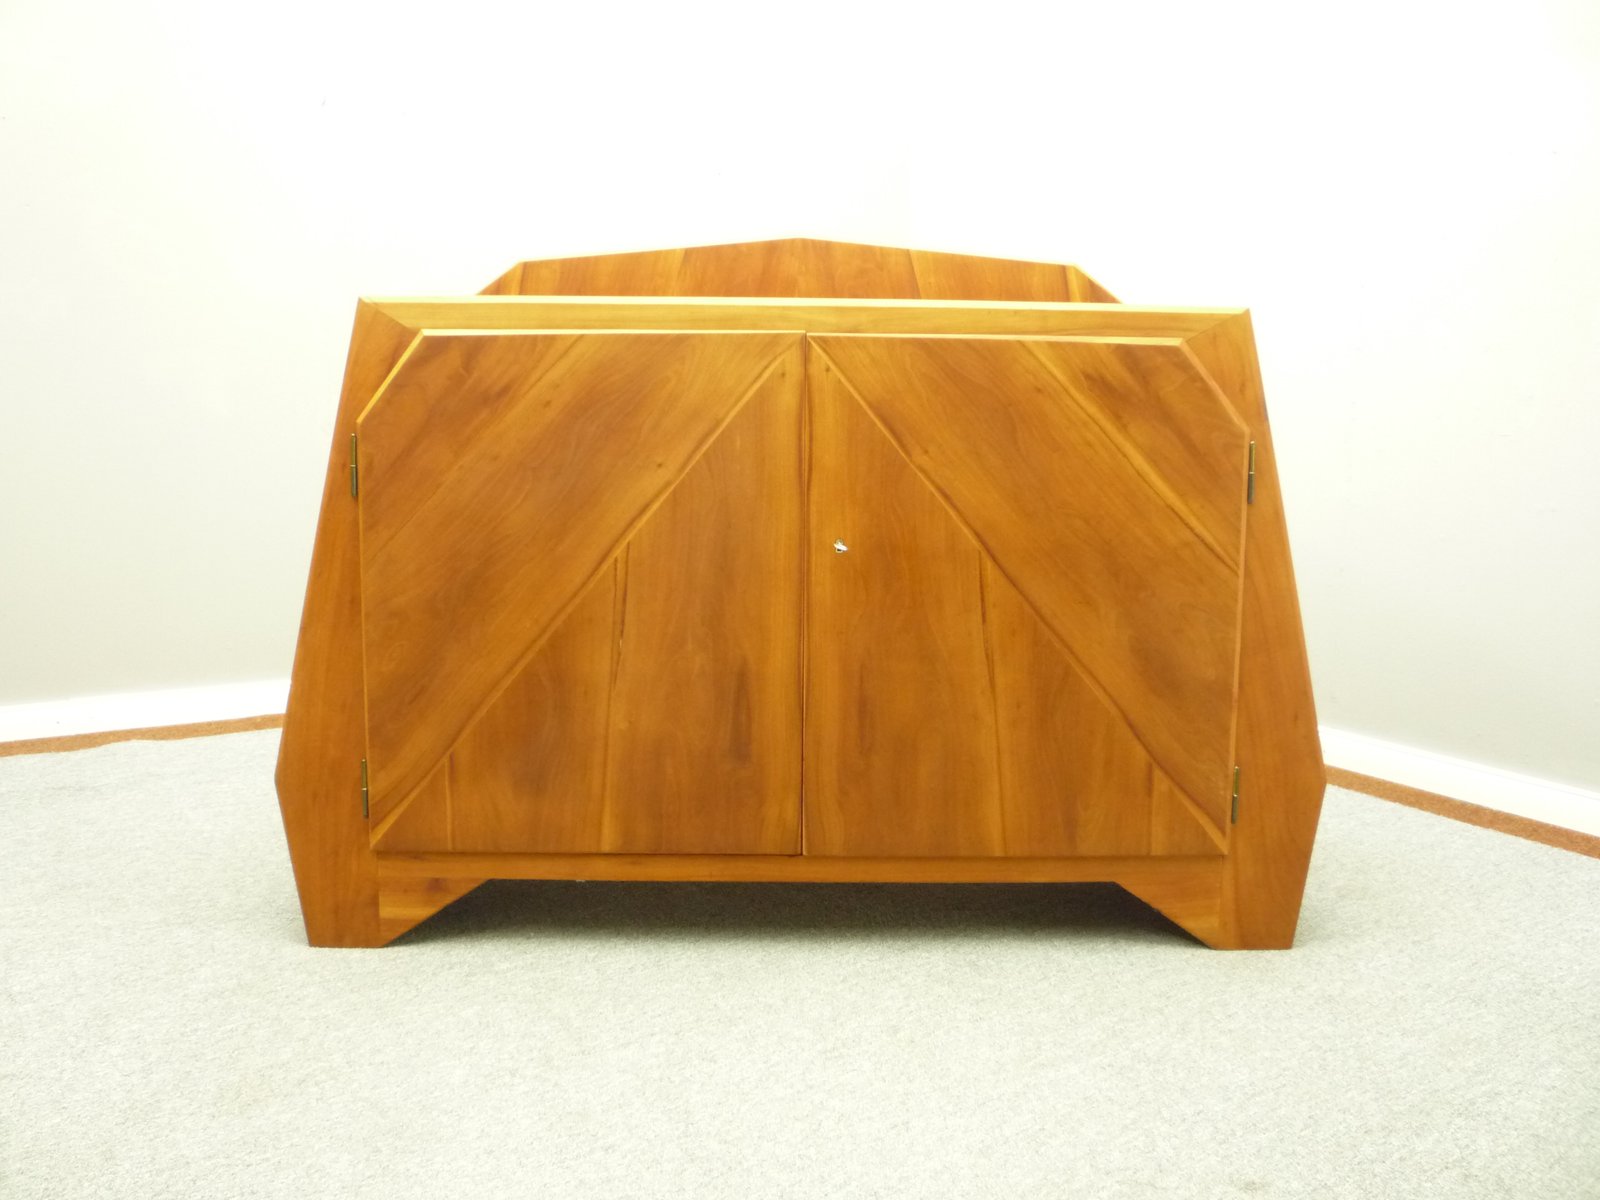 anthroposophical cherry cabinet by siegfried puetz 1920s UG-1001167